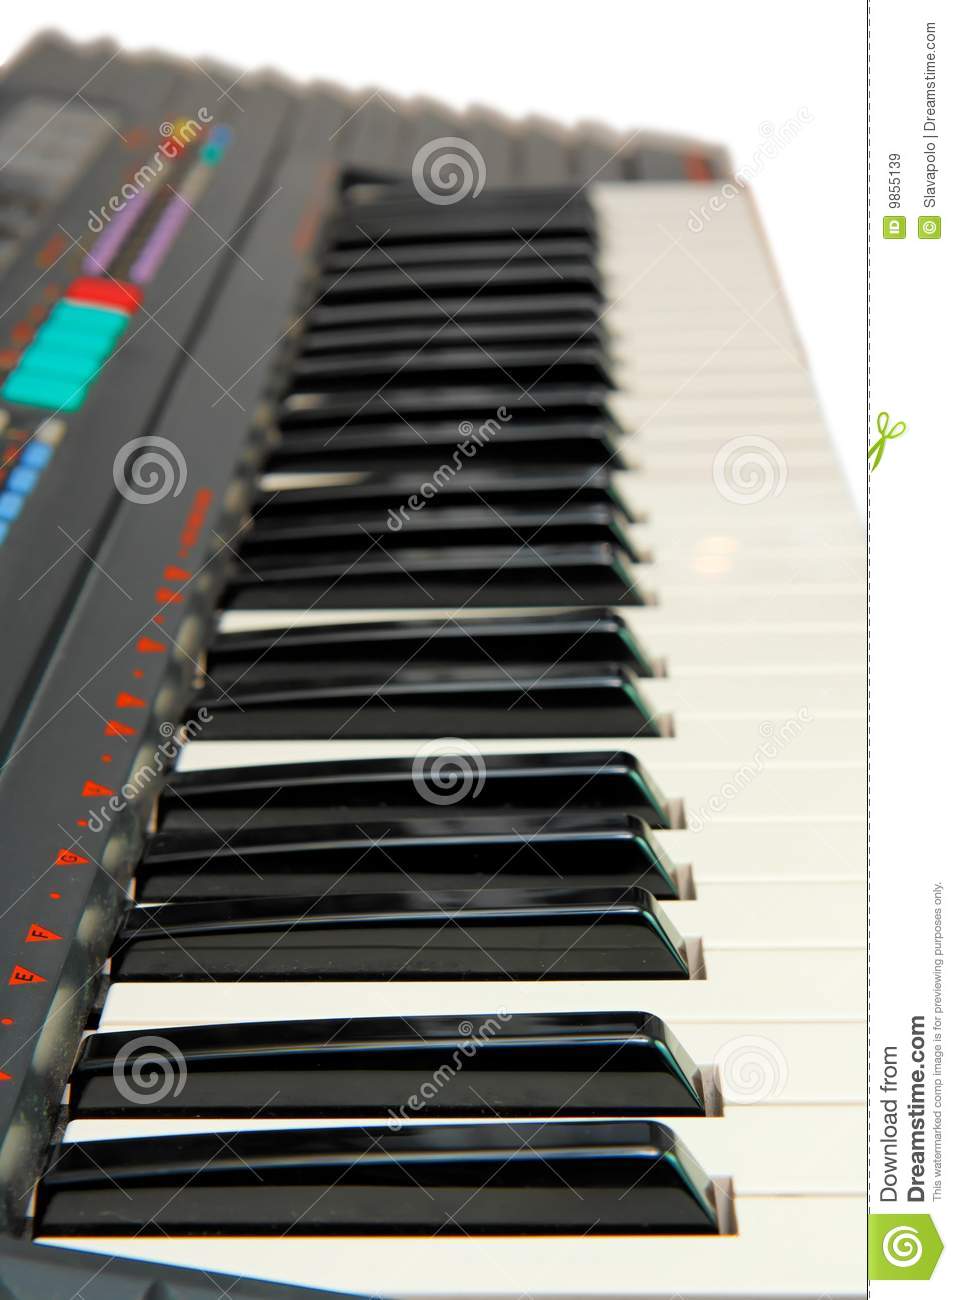 Keyboard Of Electric Piano Isolated Royalty Free Stock Images   Image